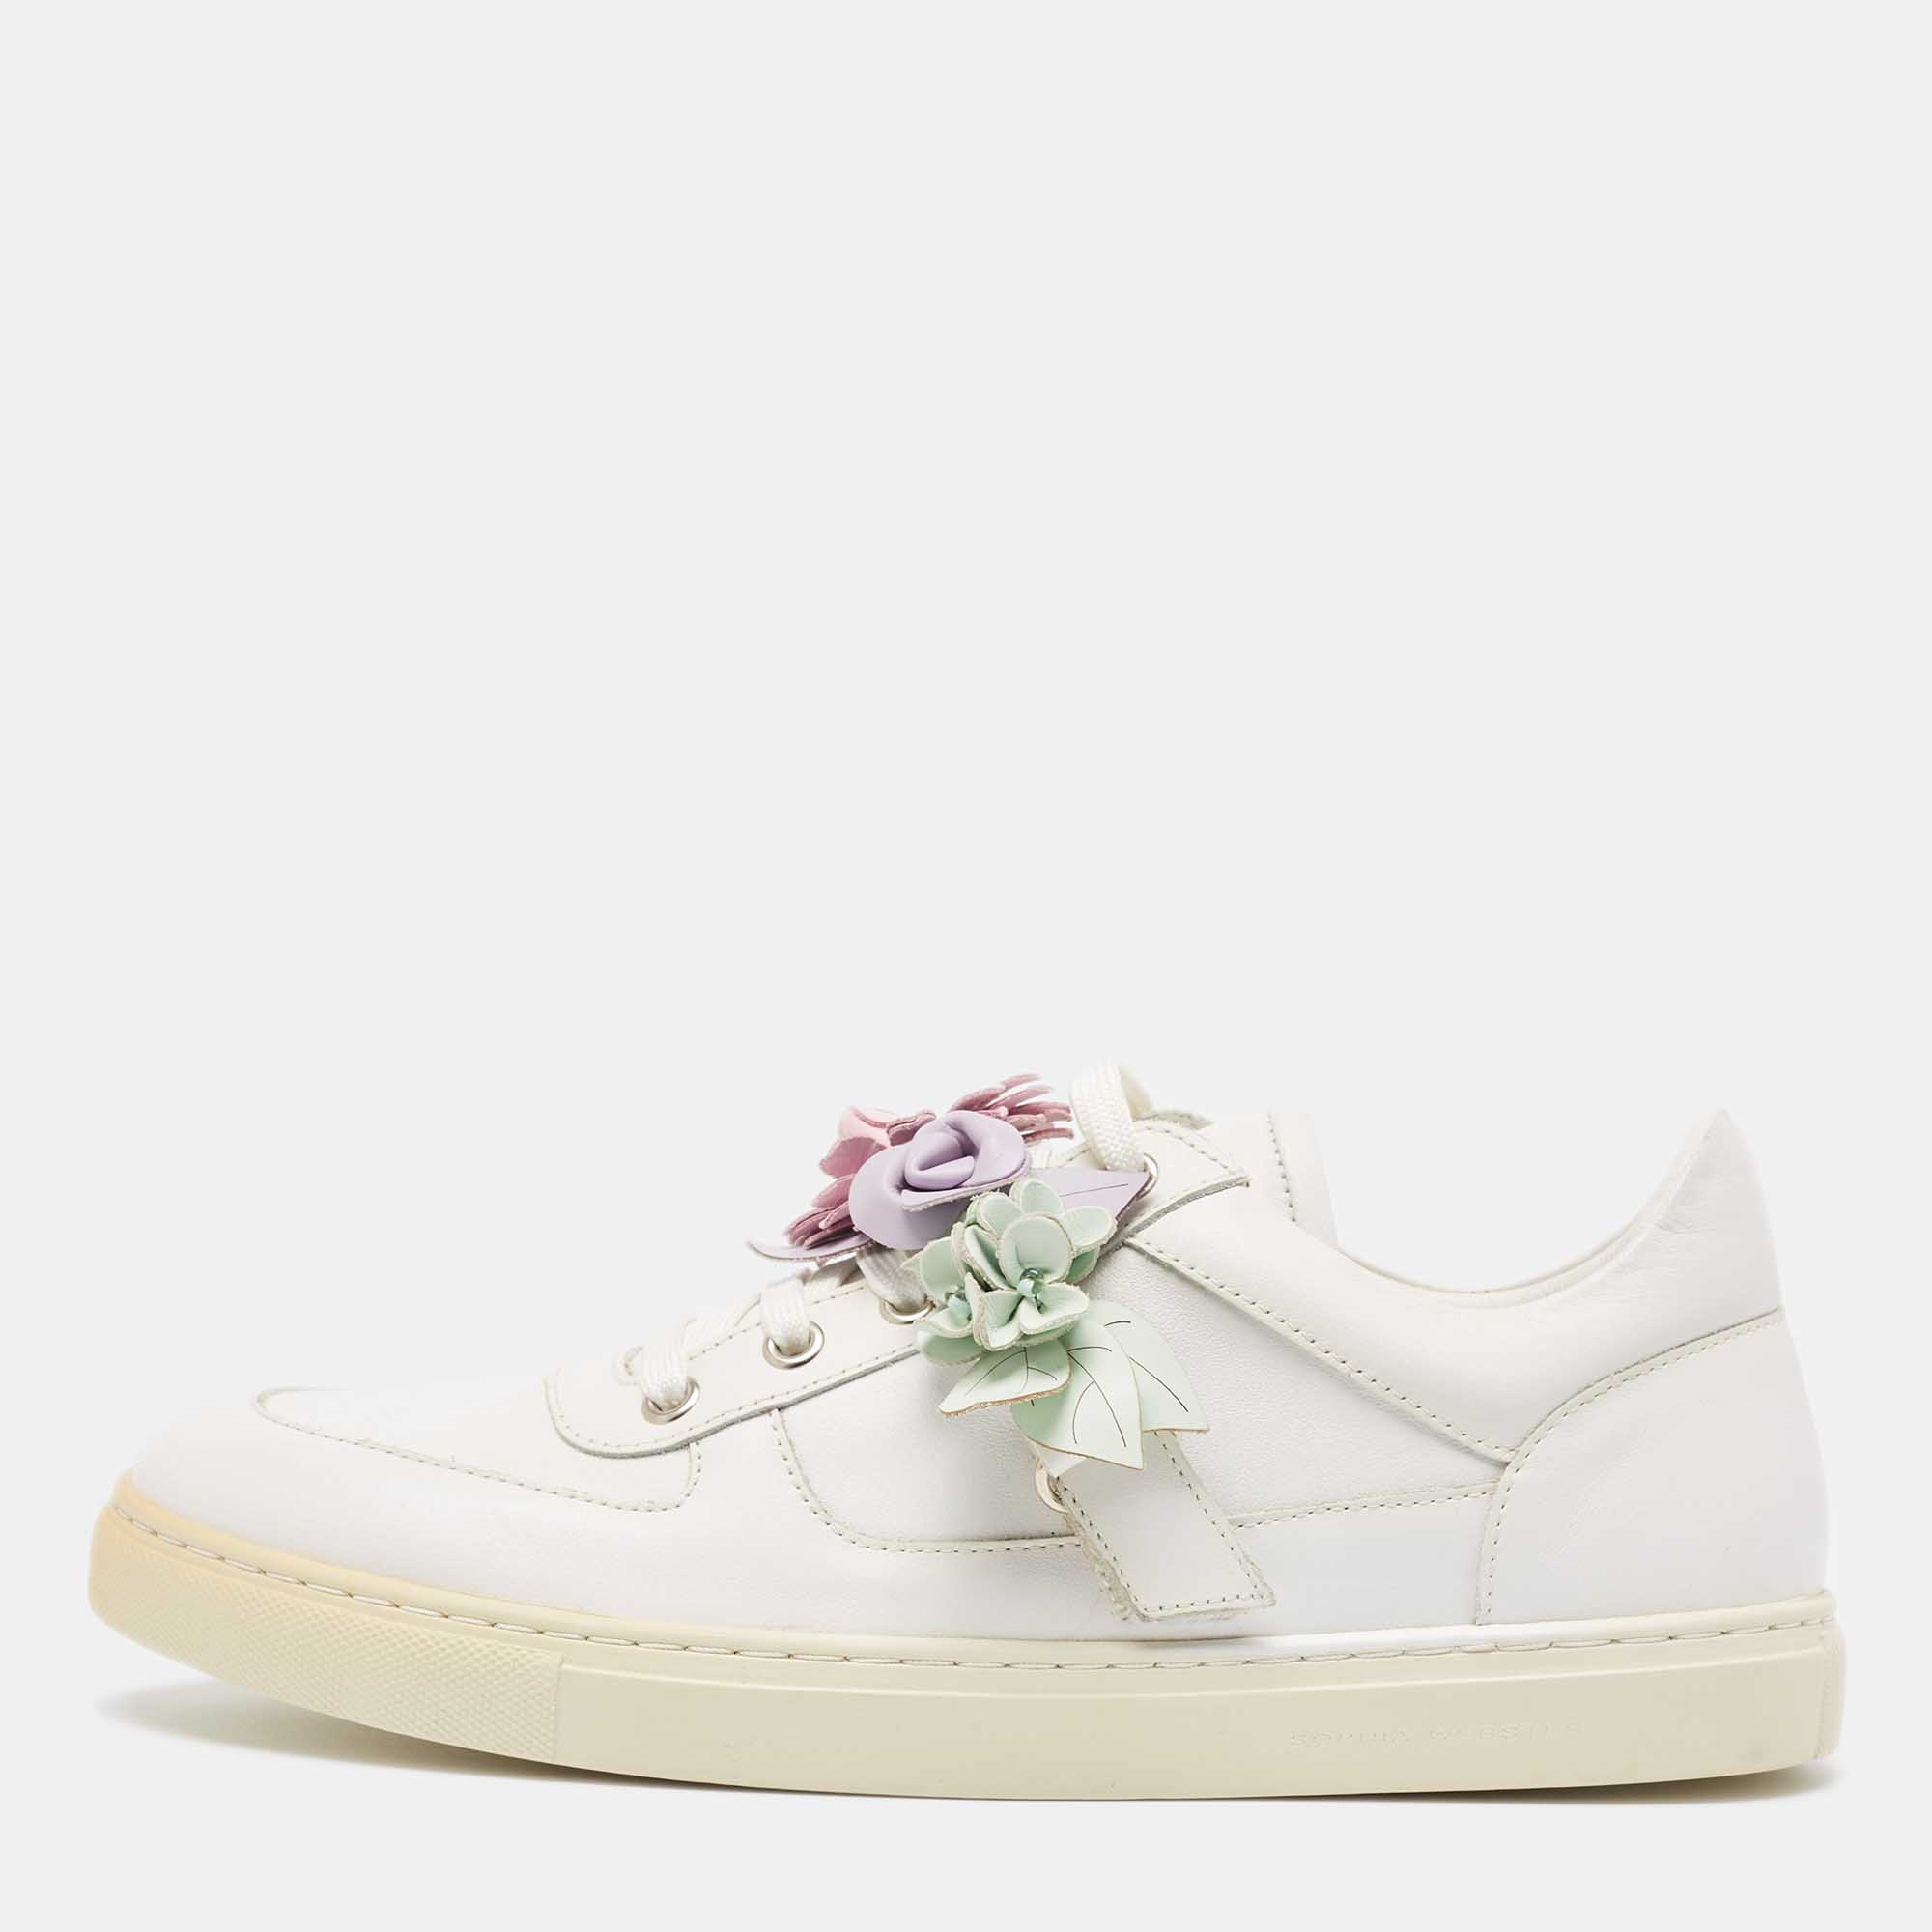 Sophia webster white leather  flower embellished low top sneakers  size 42